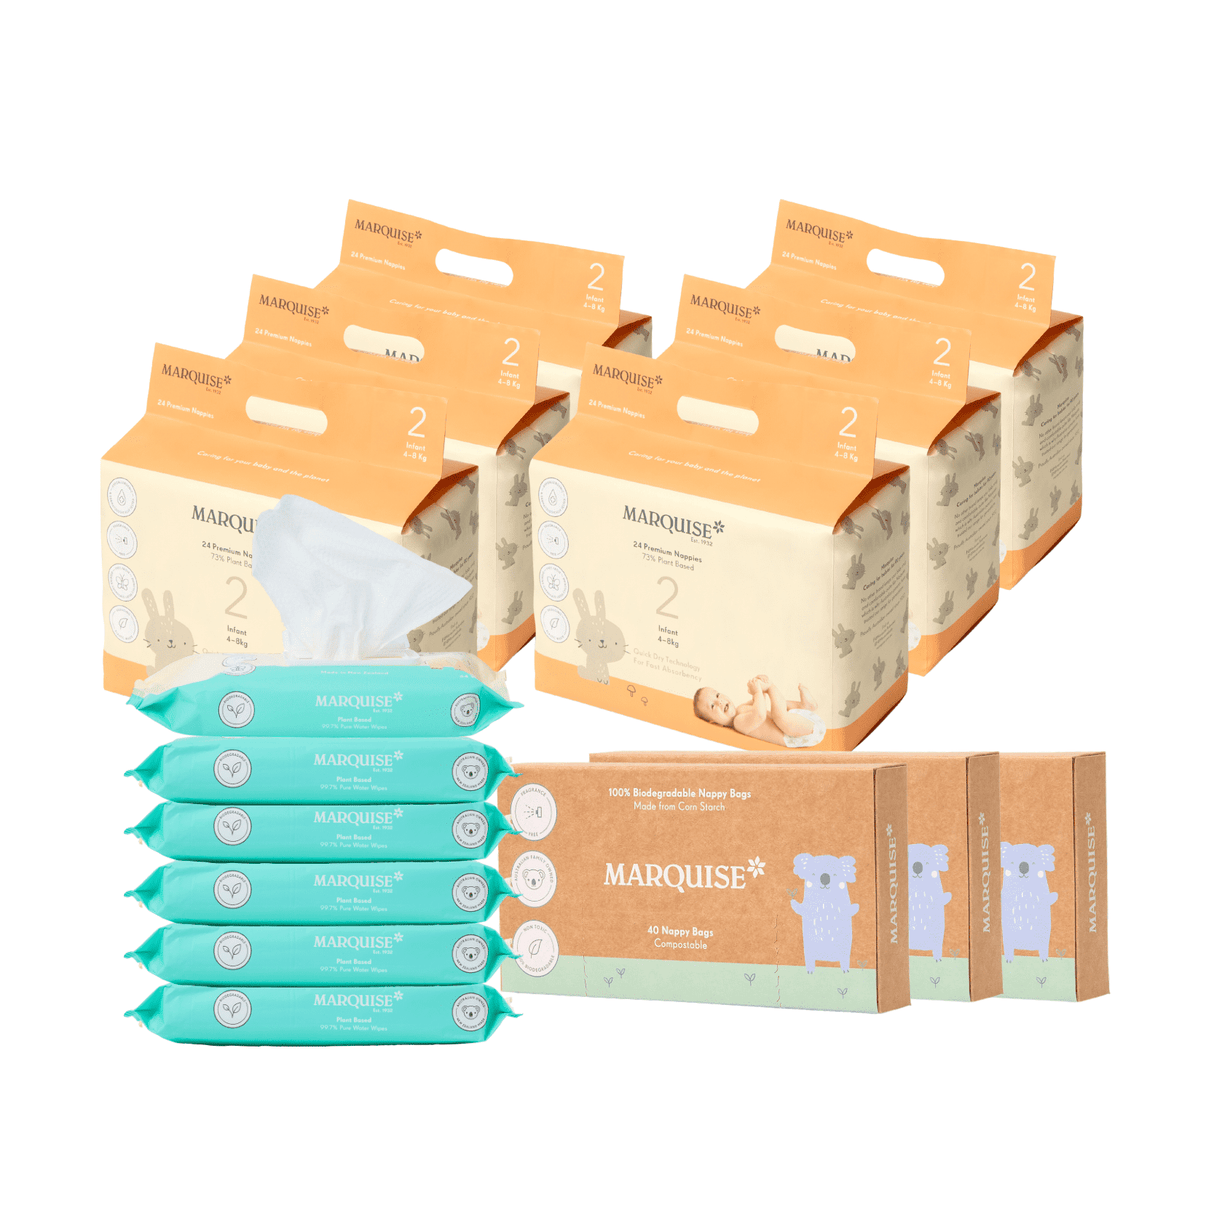 Marquise Hypoallergenic Nappies, Wipes & Nappy Bags Bulk Bundle